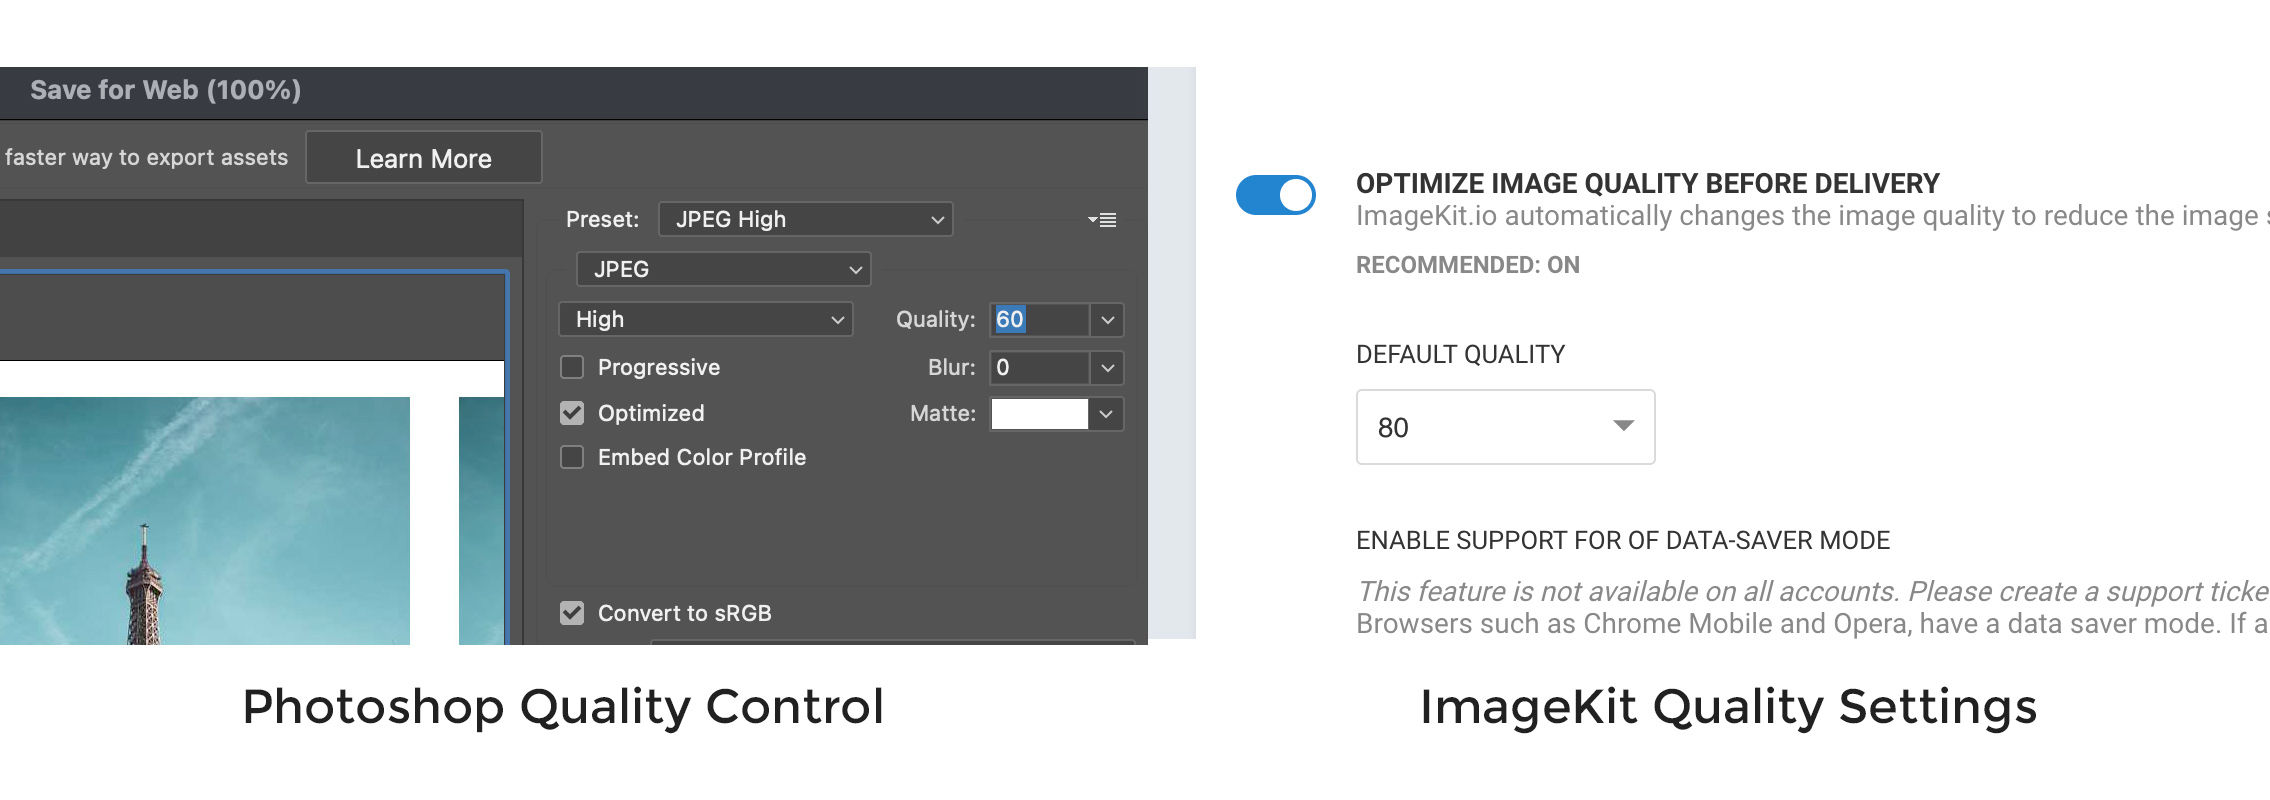 Image Quality control in Photoshop and ImageKit